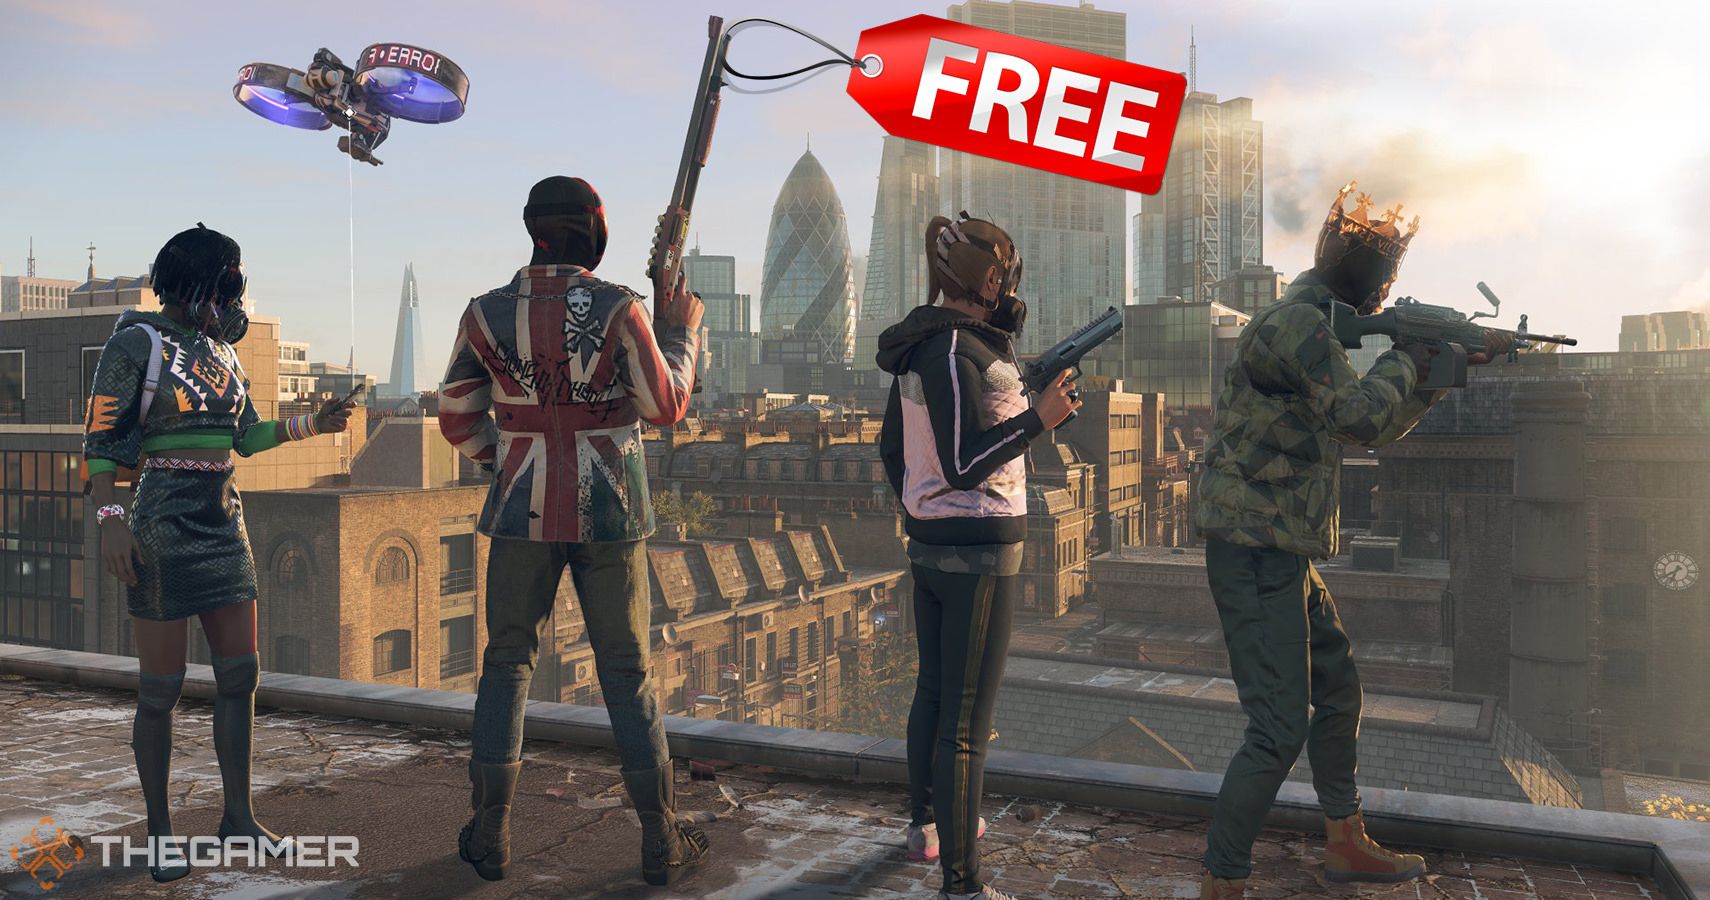 Free Online Multiplayer on the PS4 This Weekend